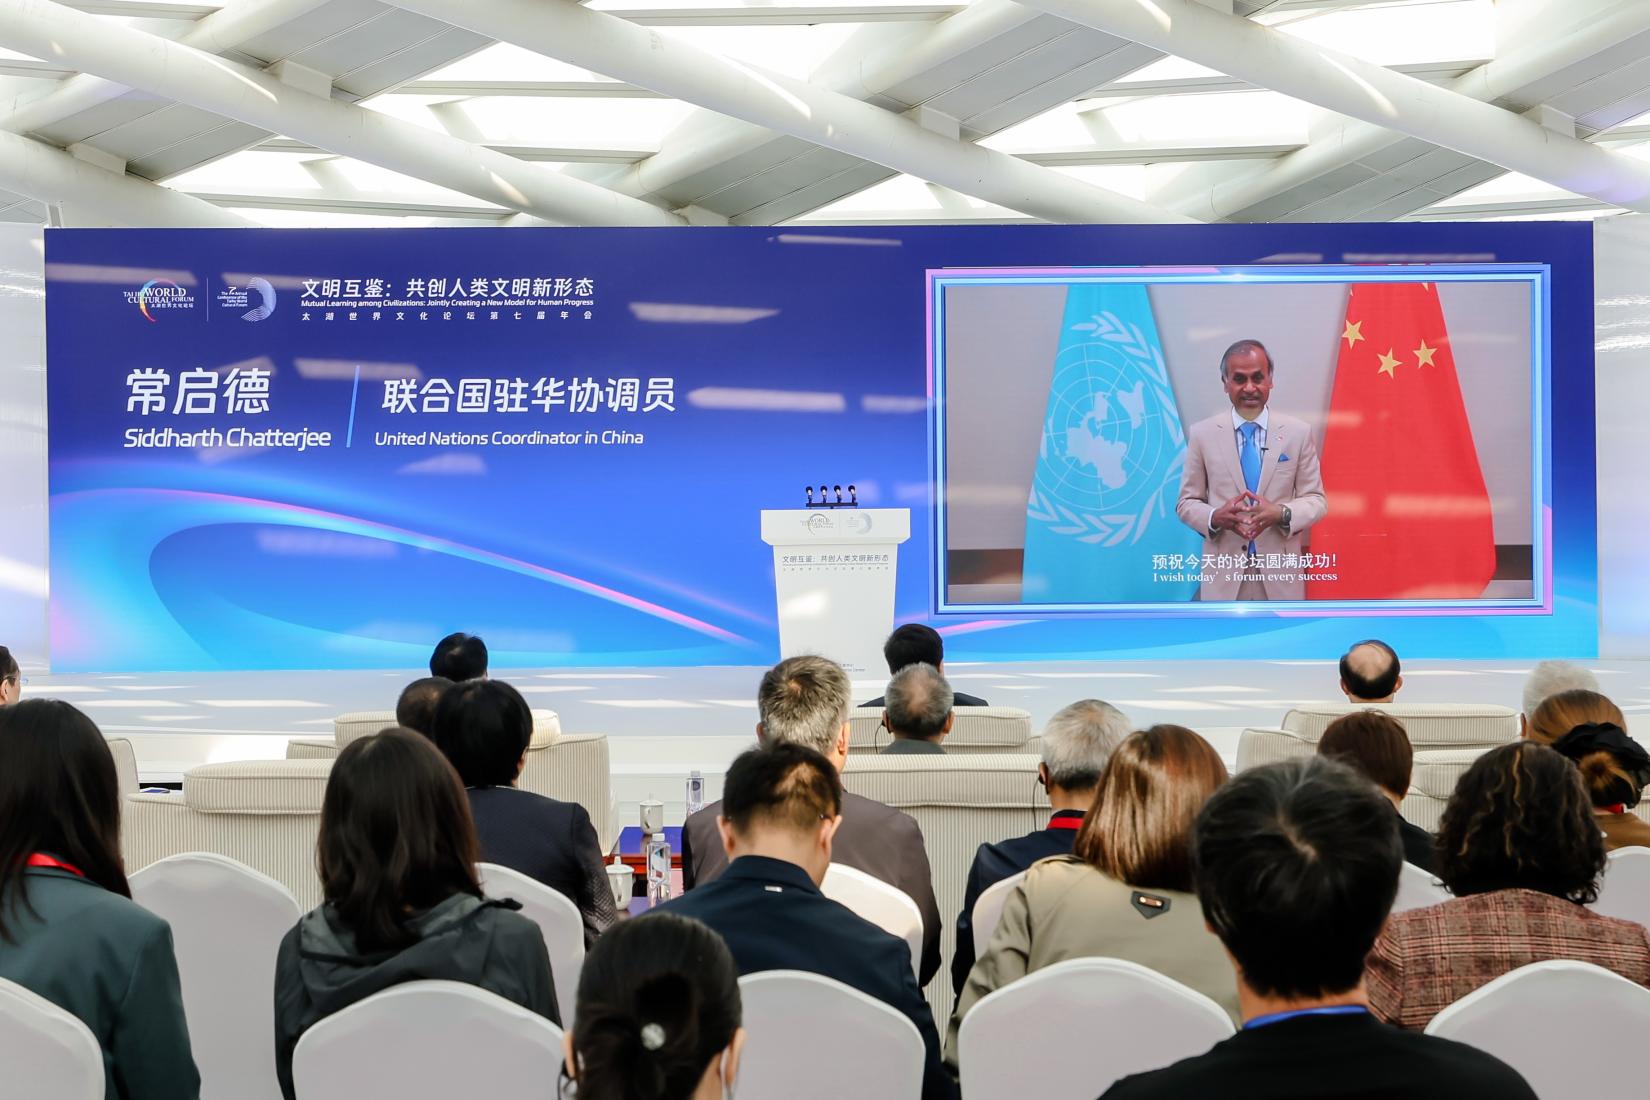 UN Resident Coordinator in China Siddharth Chatterjee at the 7th Annual Conference of Taihu World Cultural Forum. 